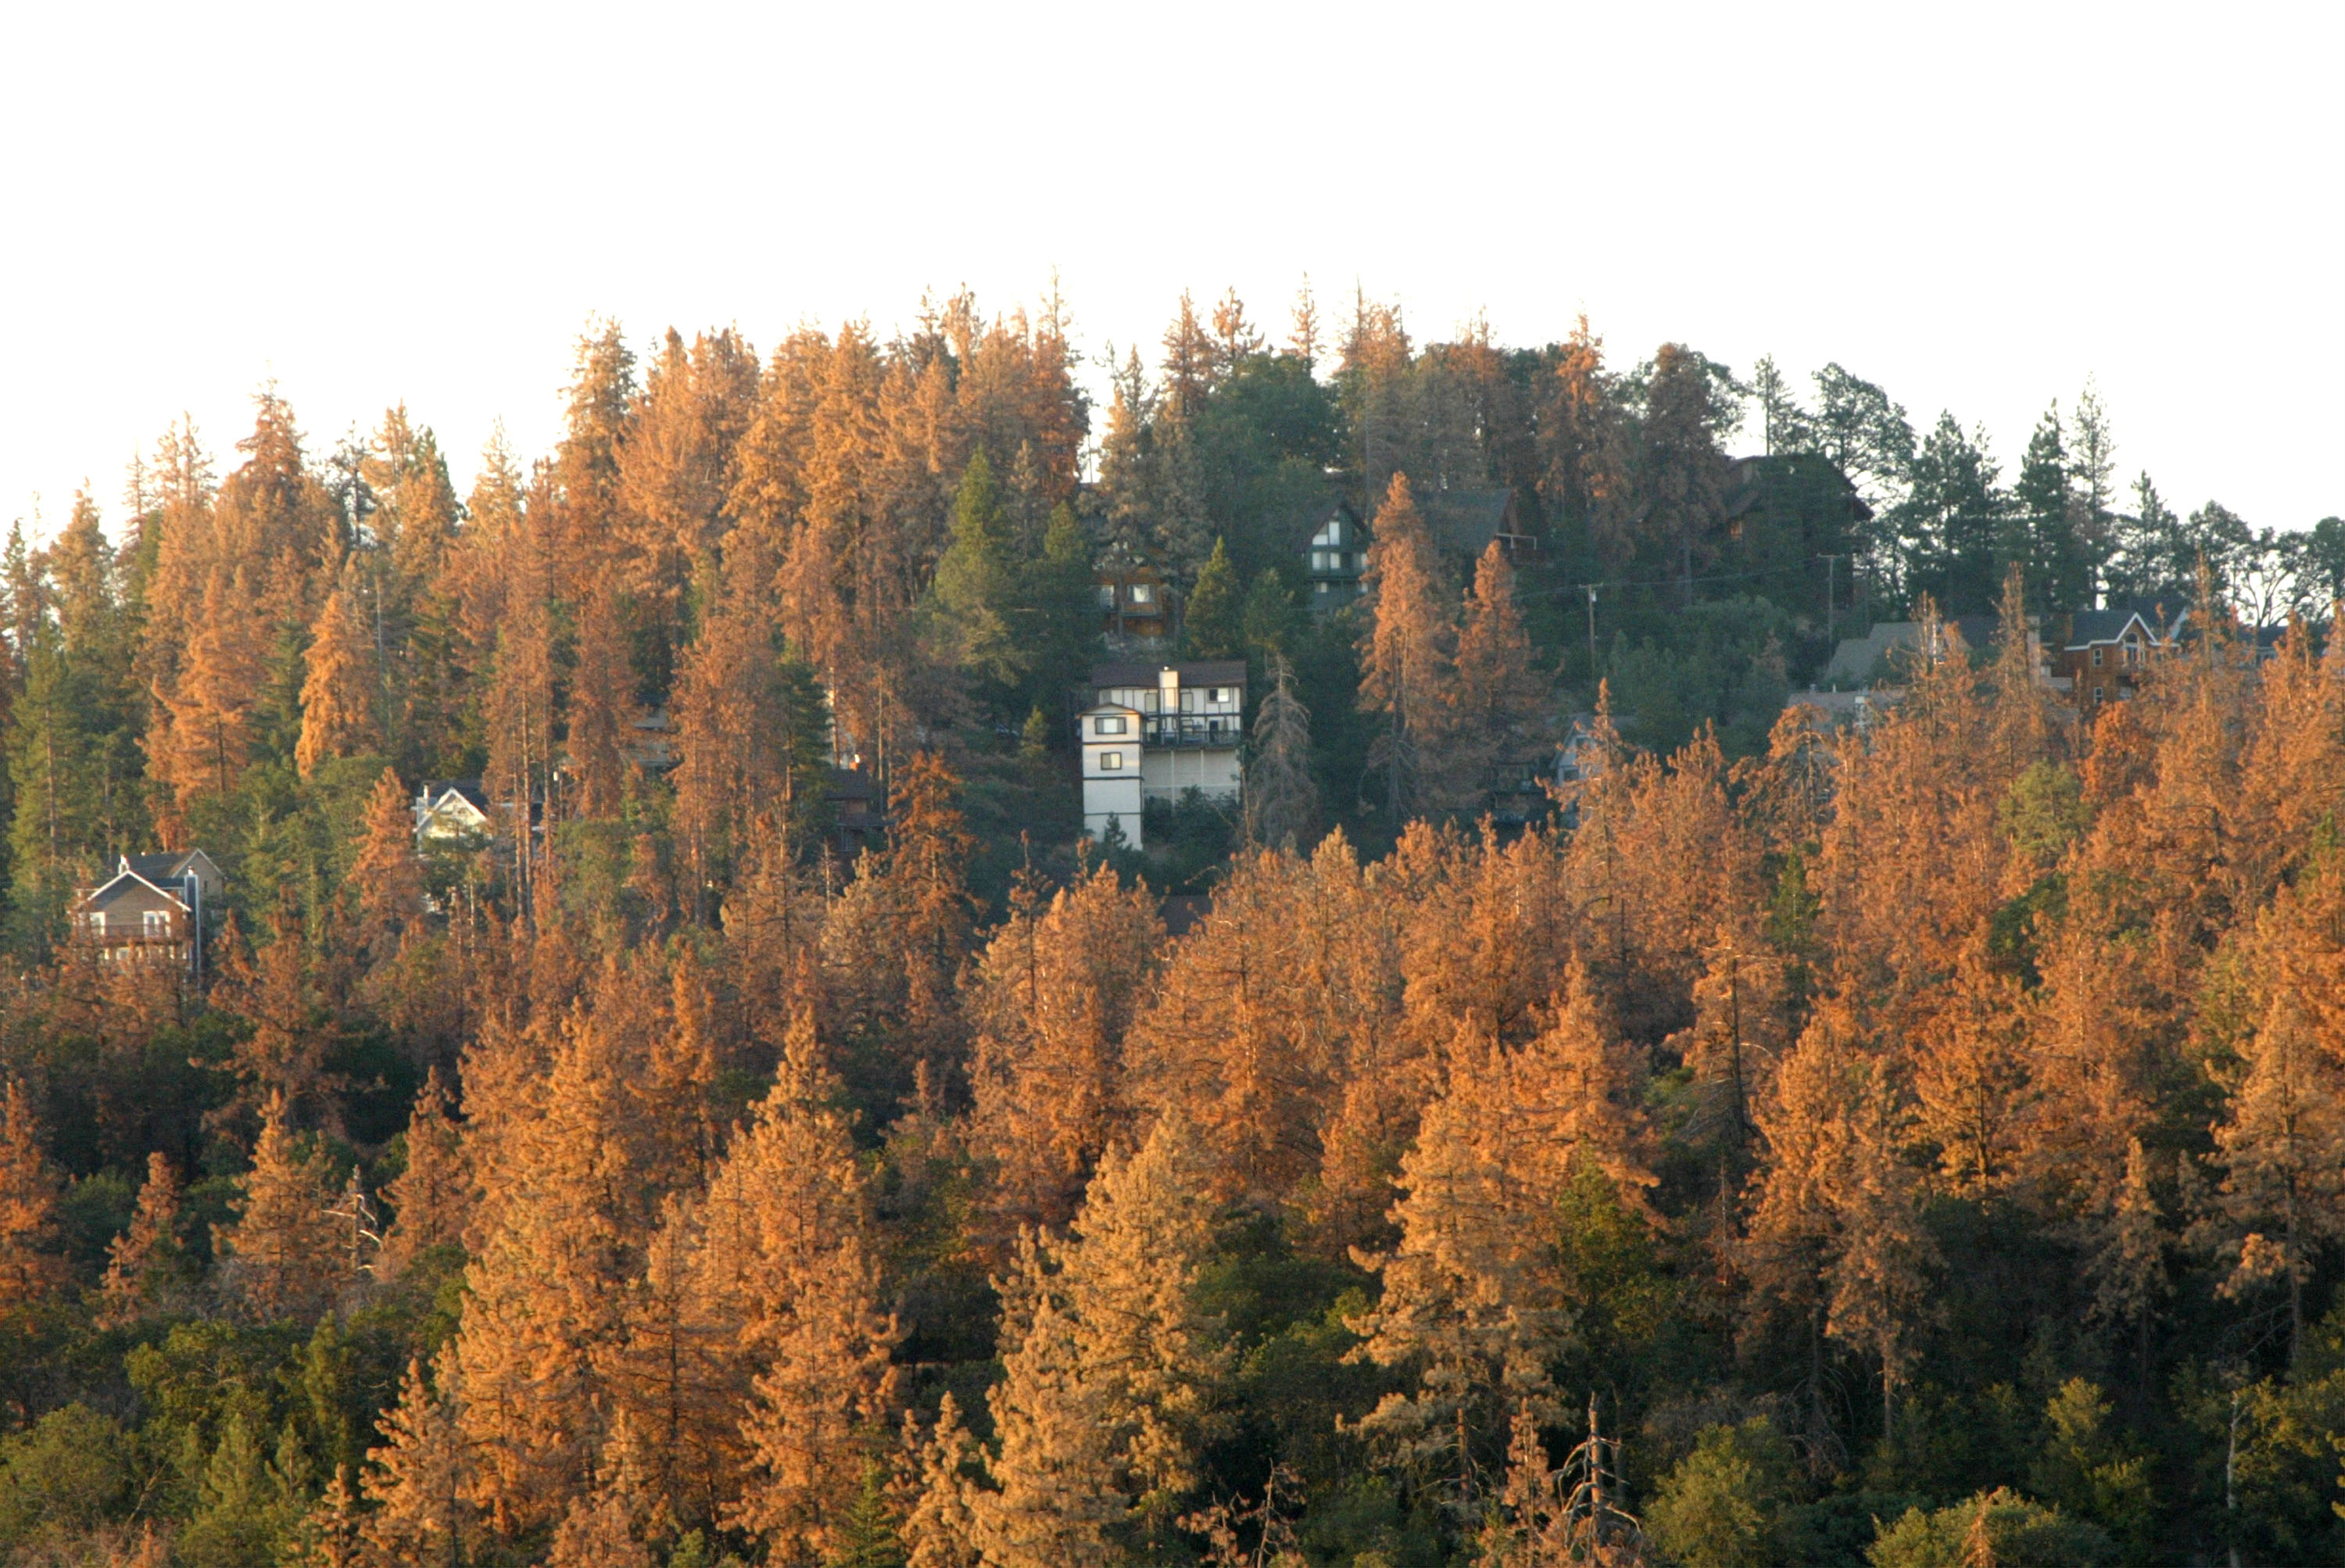 Drought leaves forests vulnerable to bark beetles.
